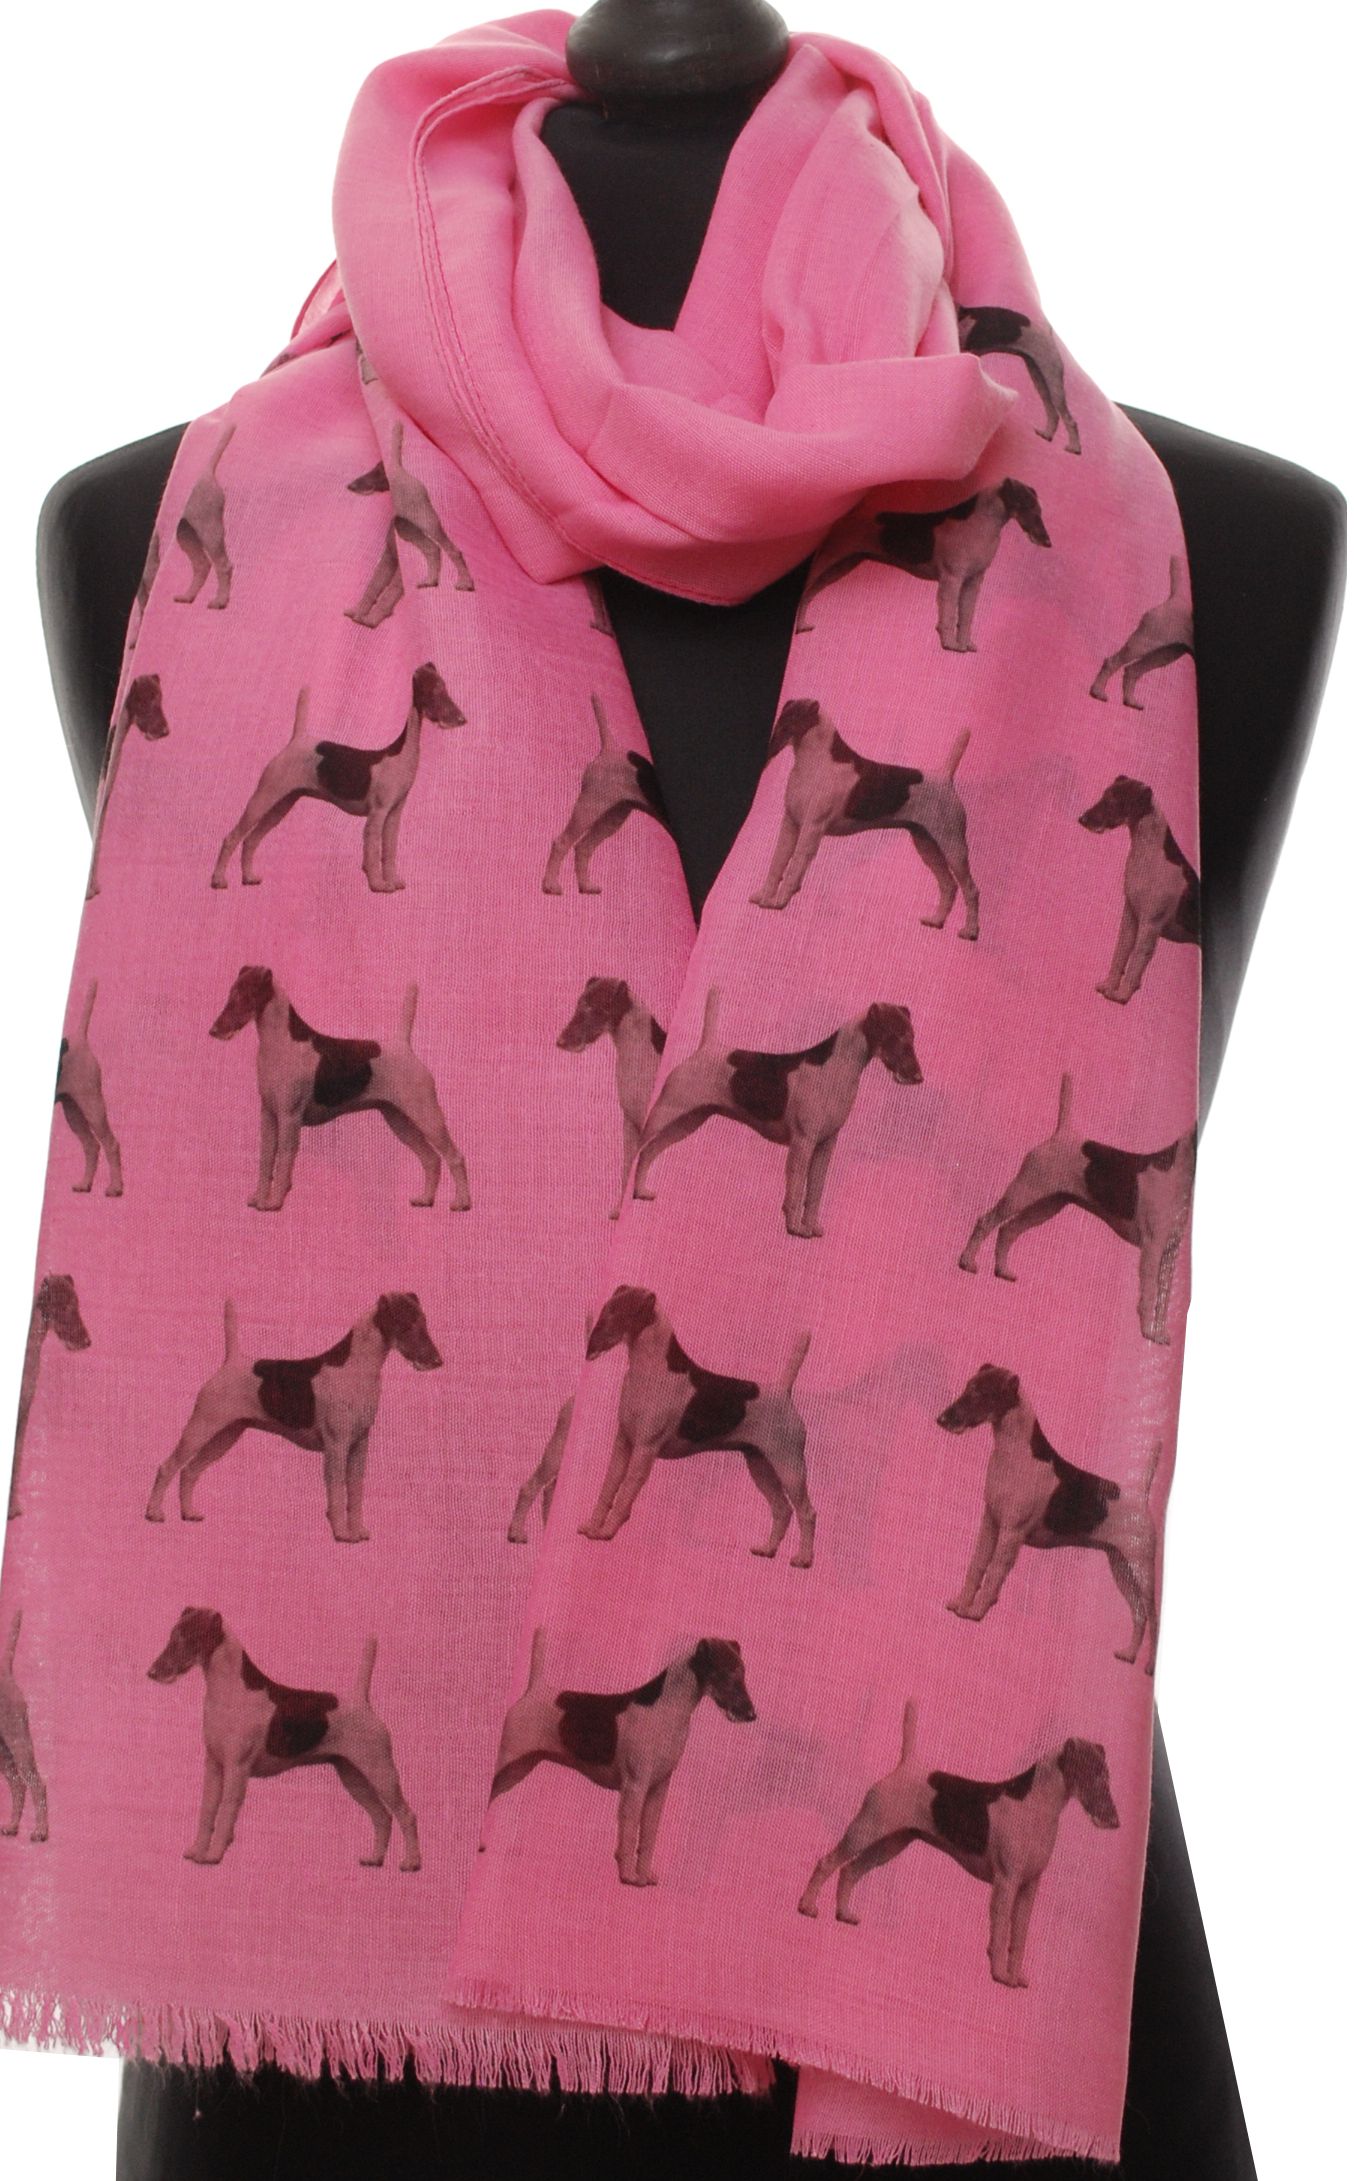 Smooth Haired Fox Terrier hand printed ladies fashion scarf